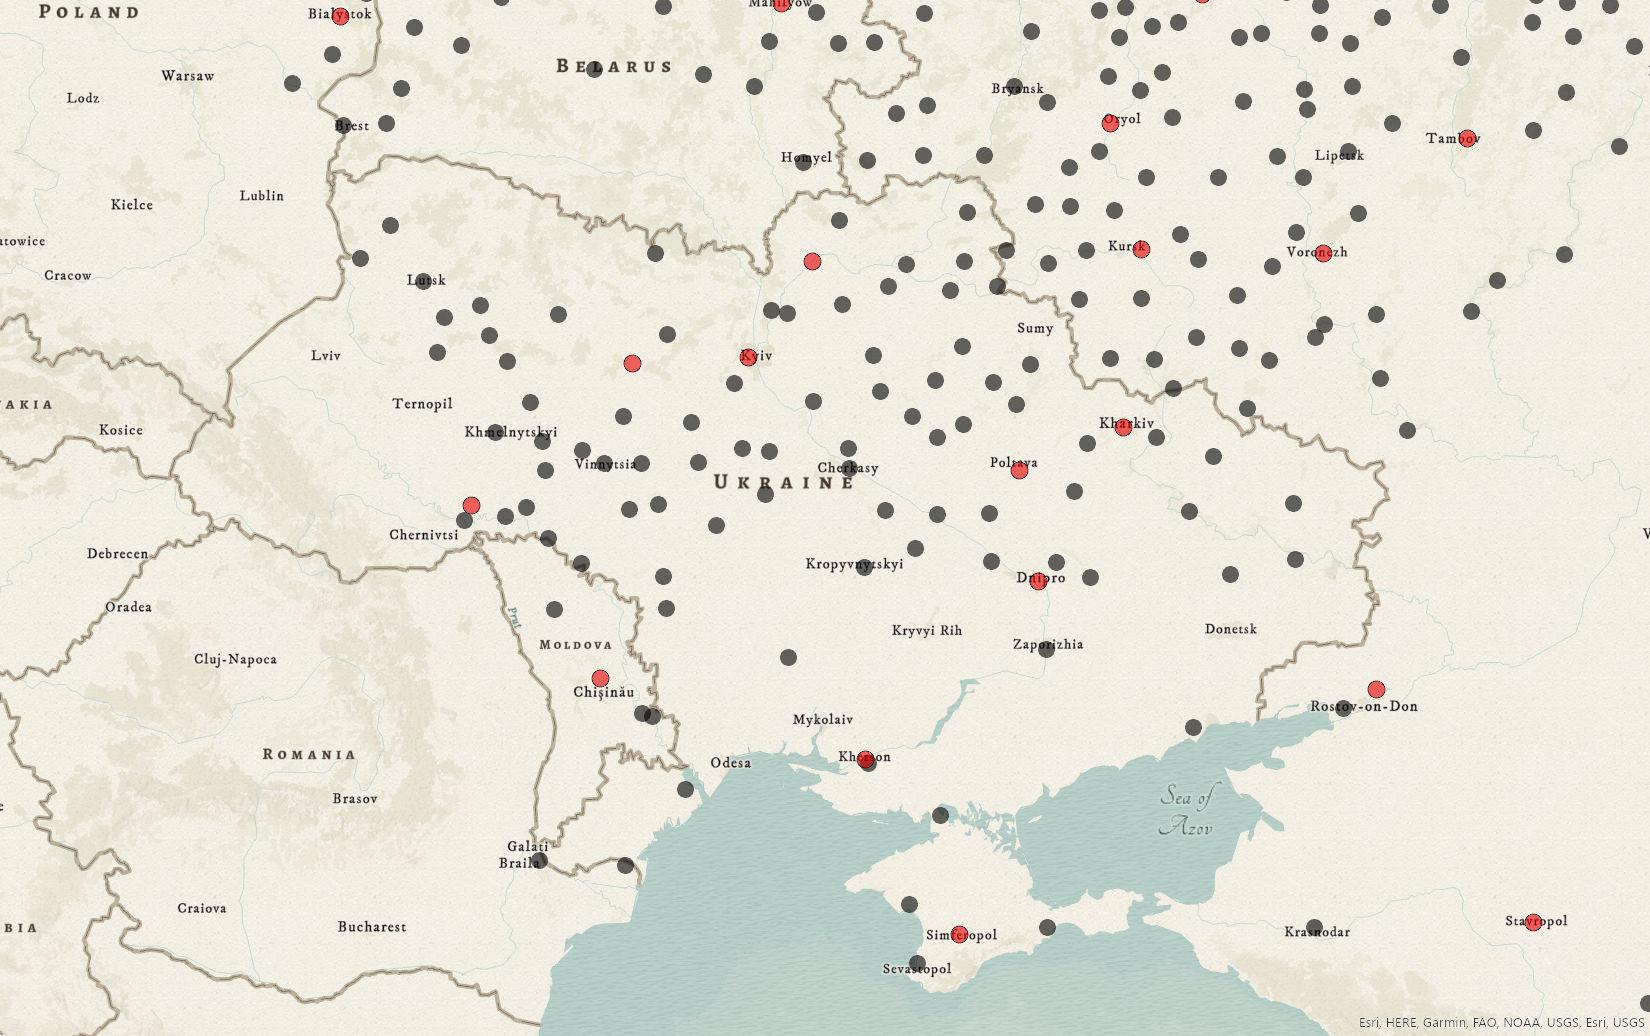 locations of 19th century towns shown on basemap